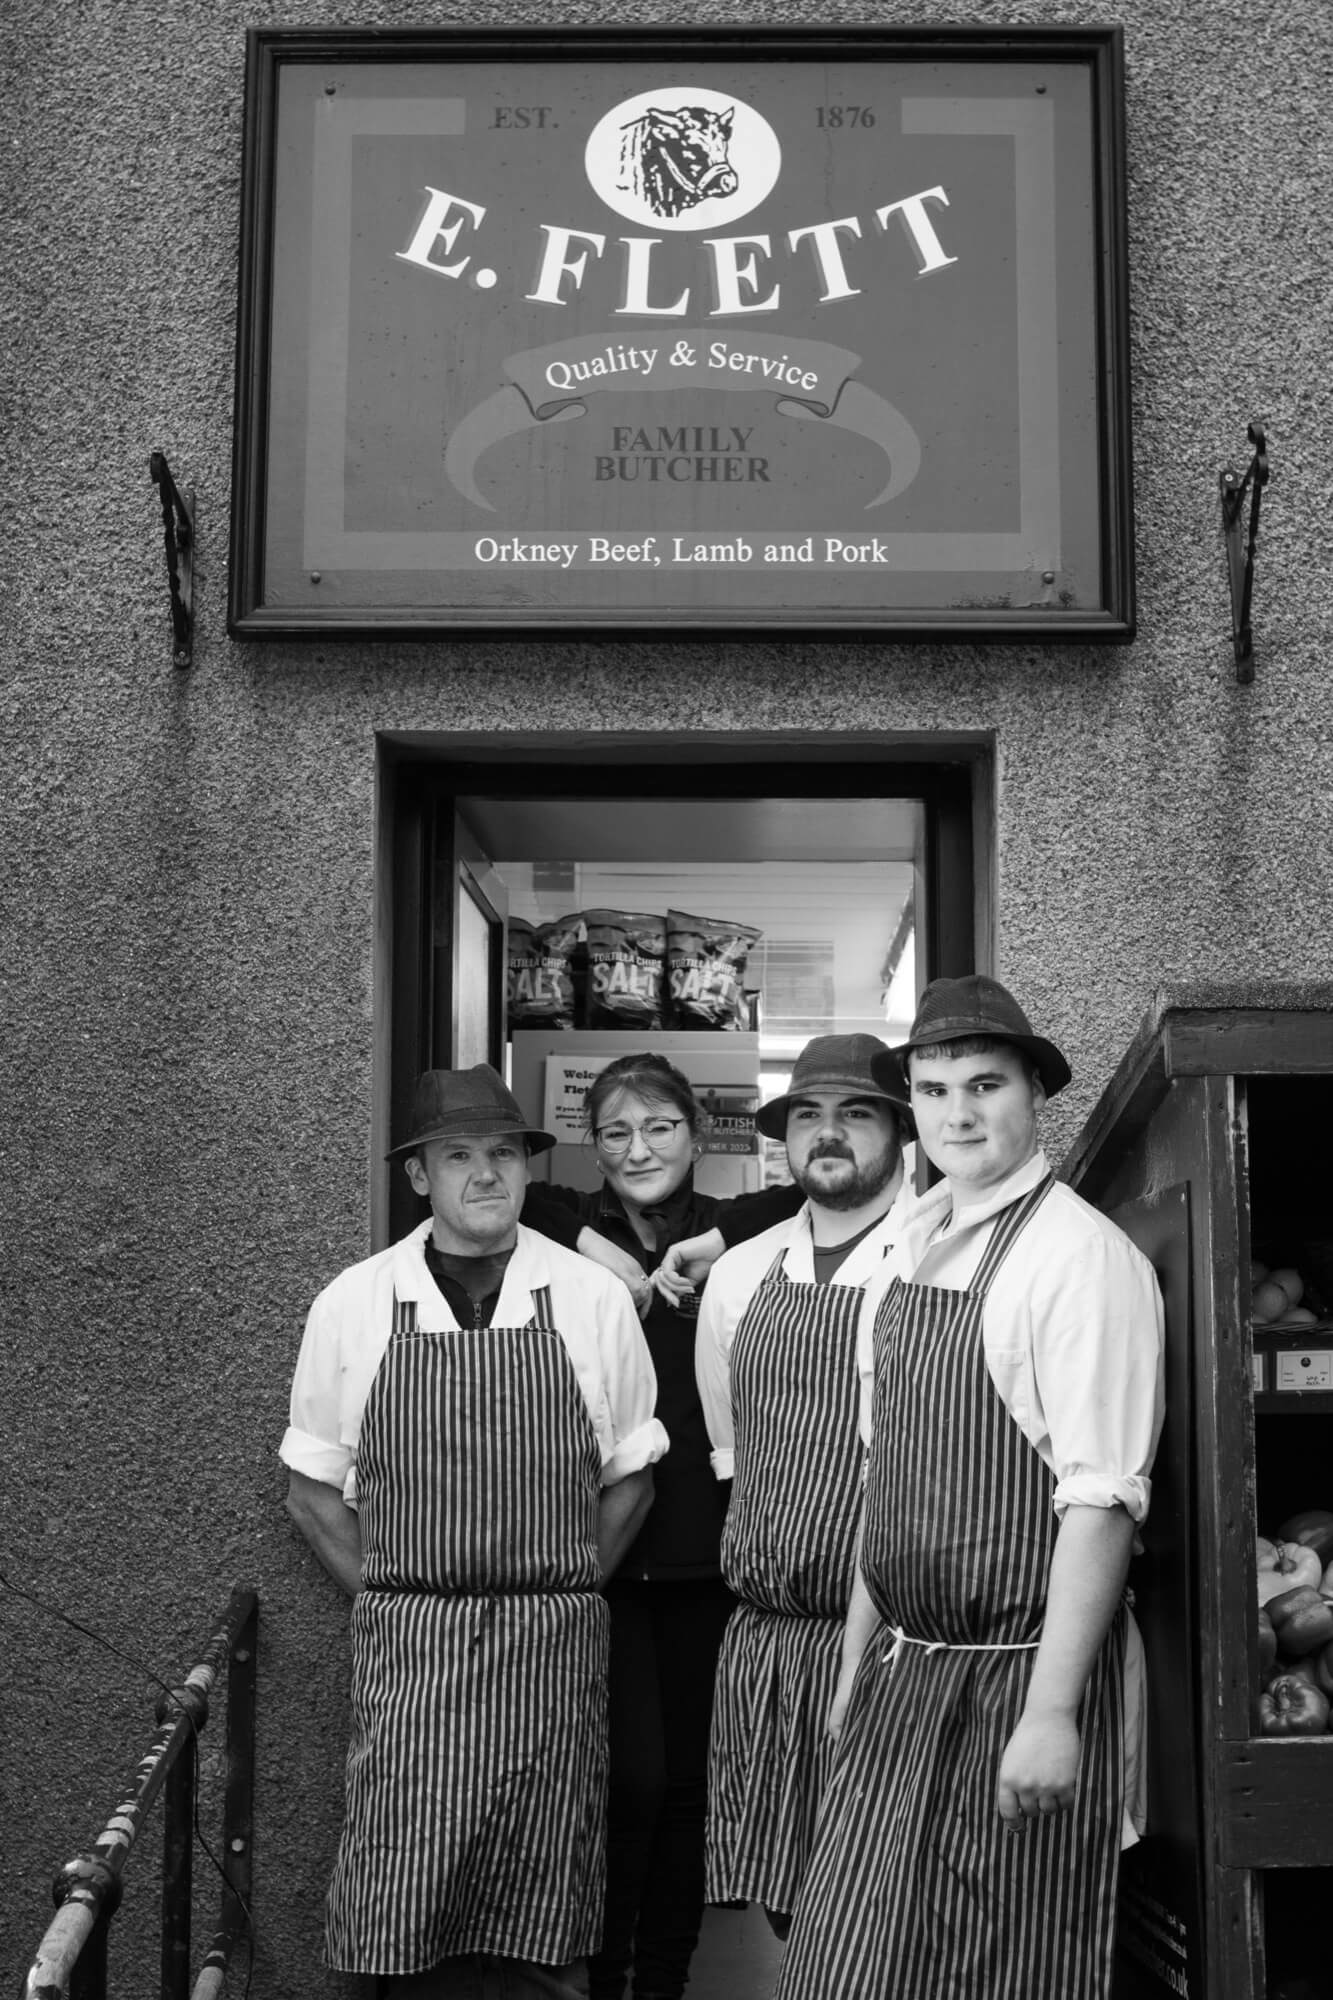 Still family owned business, John Park whose father Ally is pictured on the left, with his wife and sons, Janette, Erik and Alistair Park.